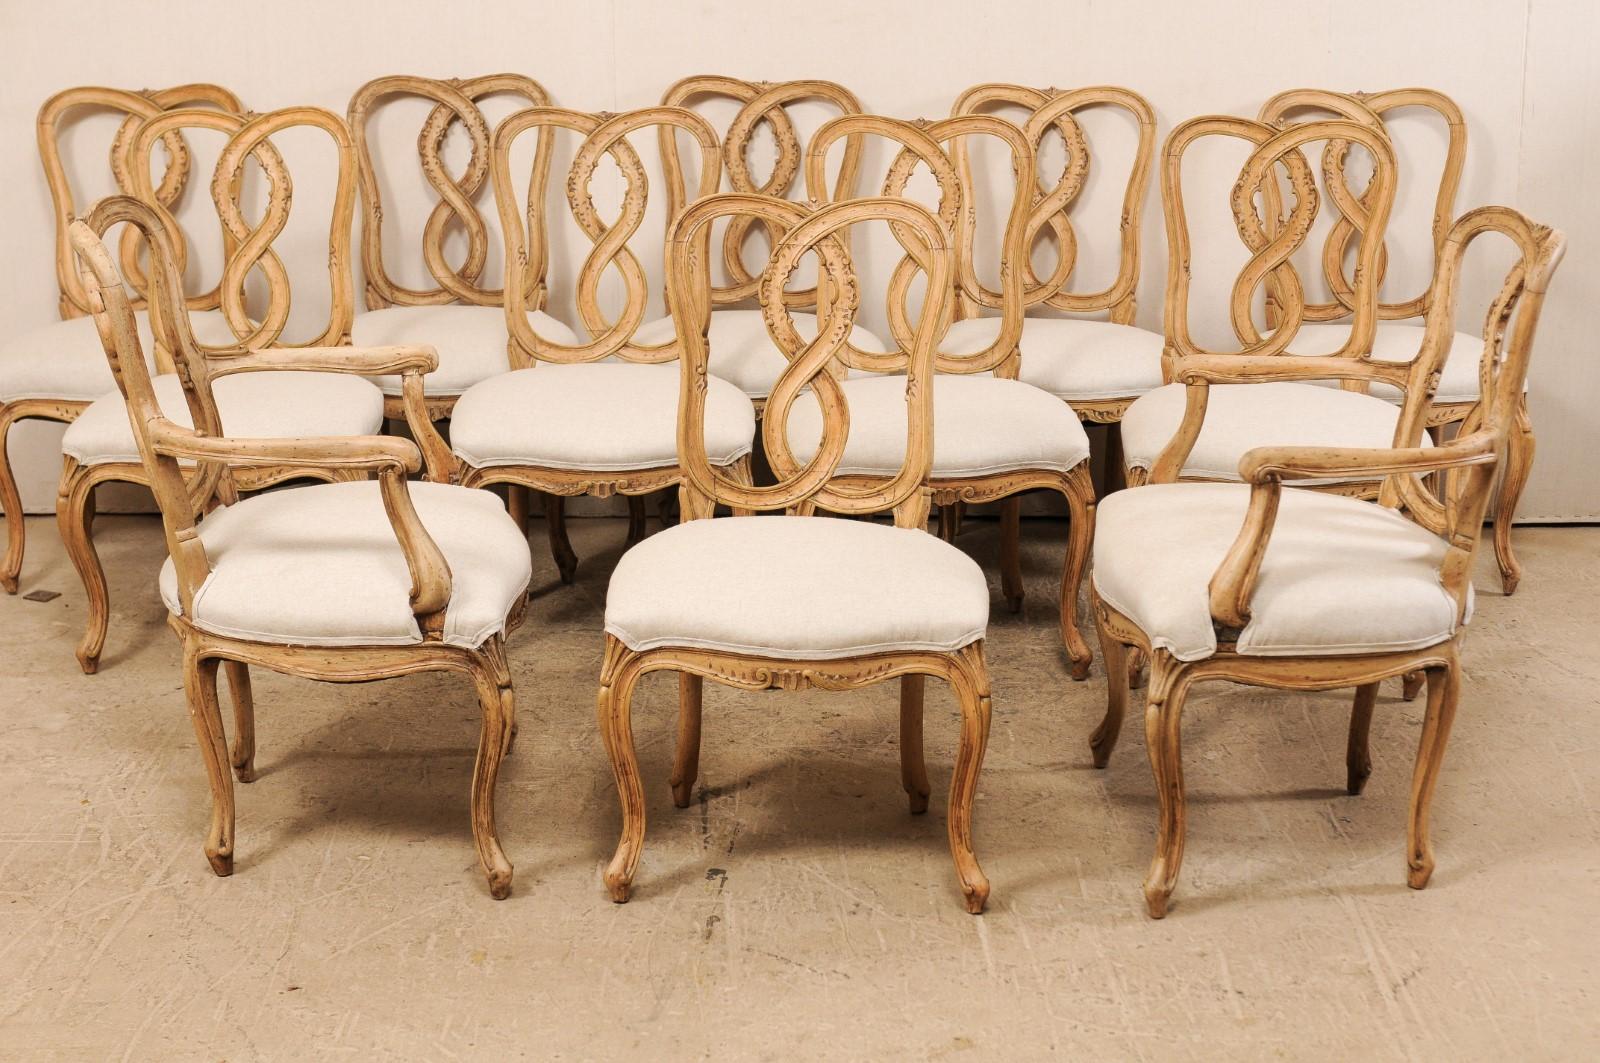 20th Century Set of Twelve Venetian Style Carved Wood Ribbon Back-Splat Dining Room Chairs